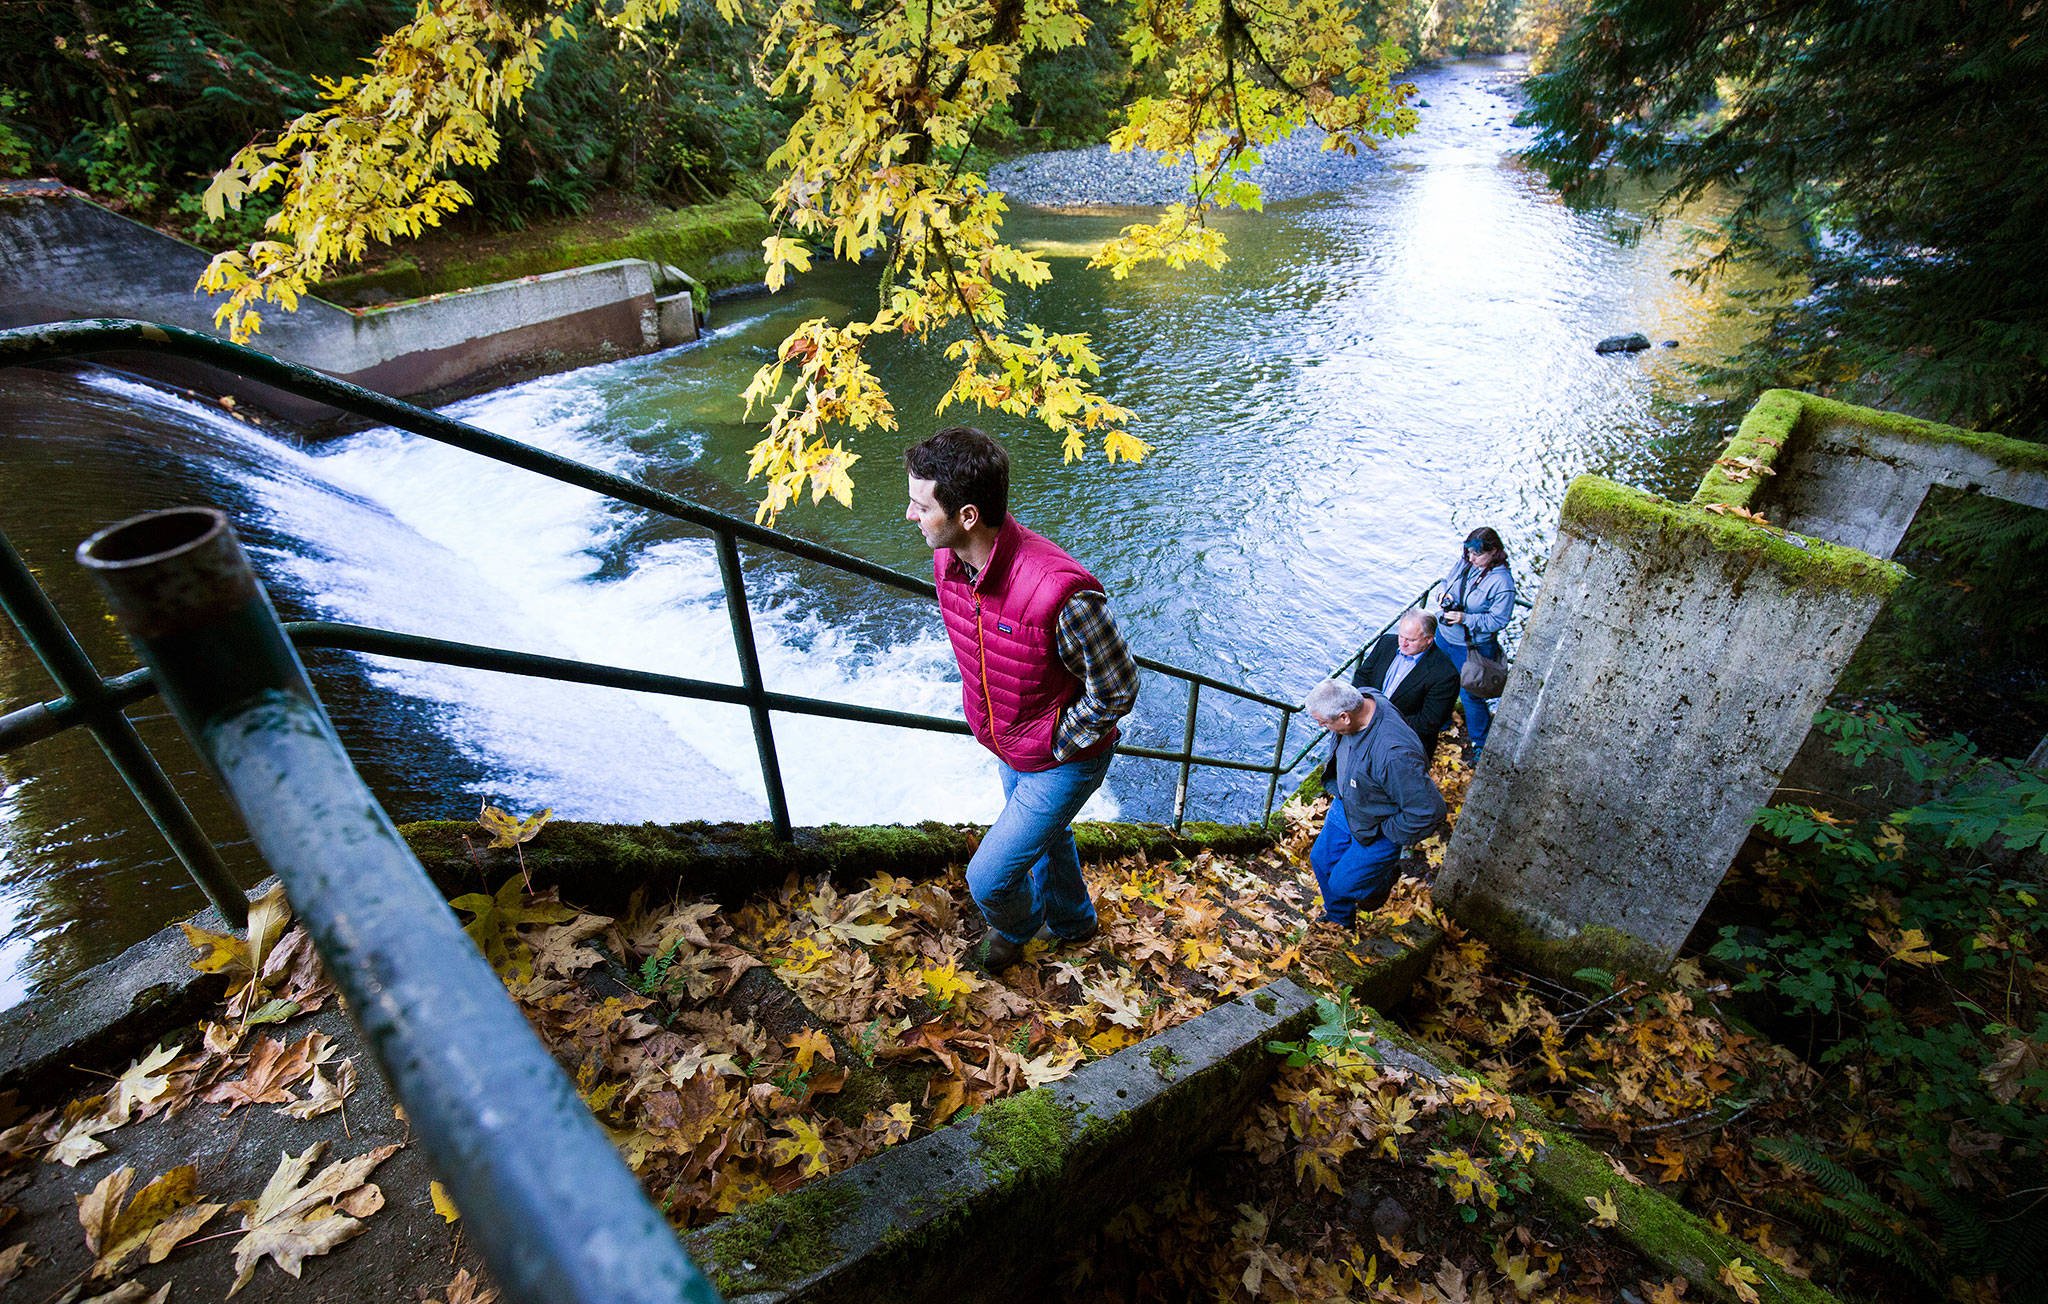 Tulalip Tribes restoration ecologist Brett Shattuck, in red vest, takes a tour group up the steps of the Pilchuck Dam along the Pilchuck River on Tuesday, Oct. 16, in Granite Falls. (Andy Bronson / The Herald)